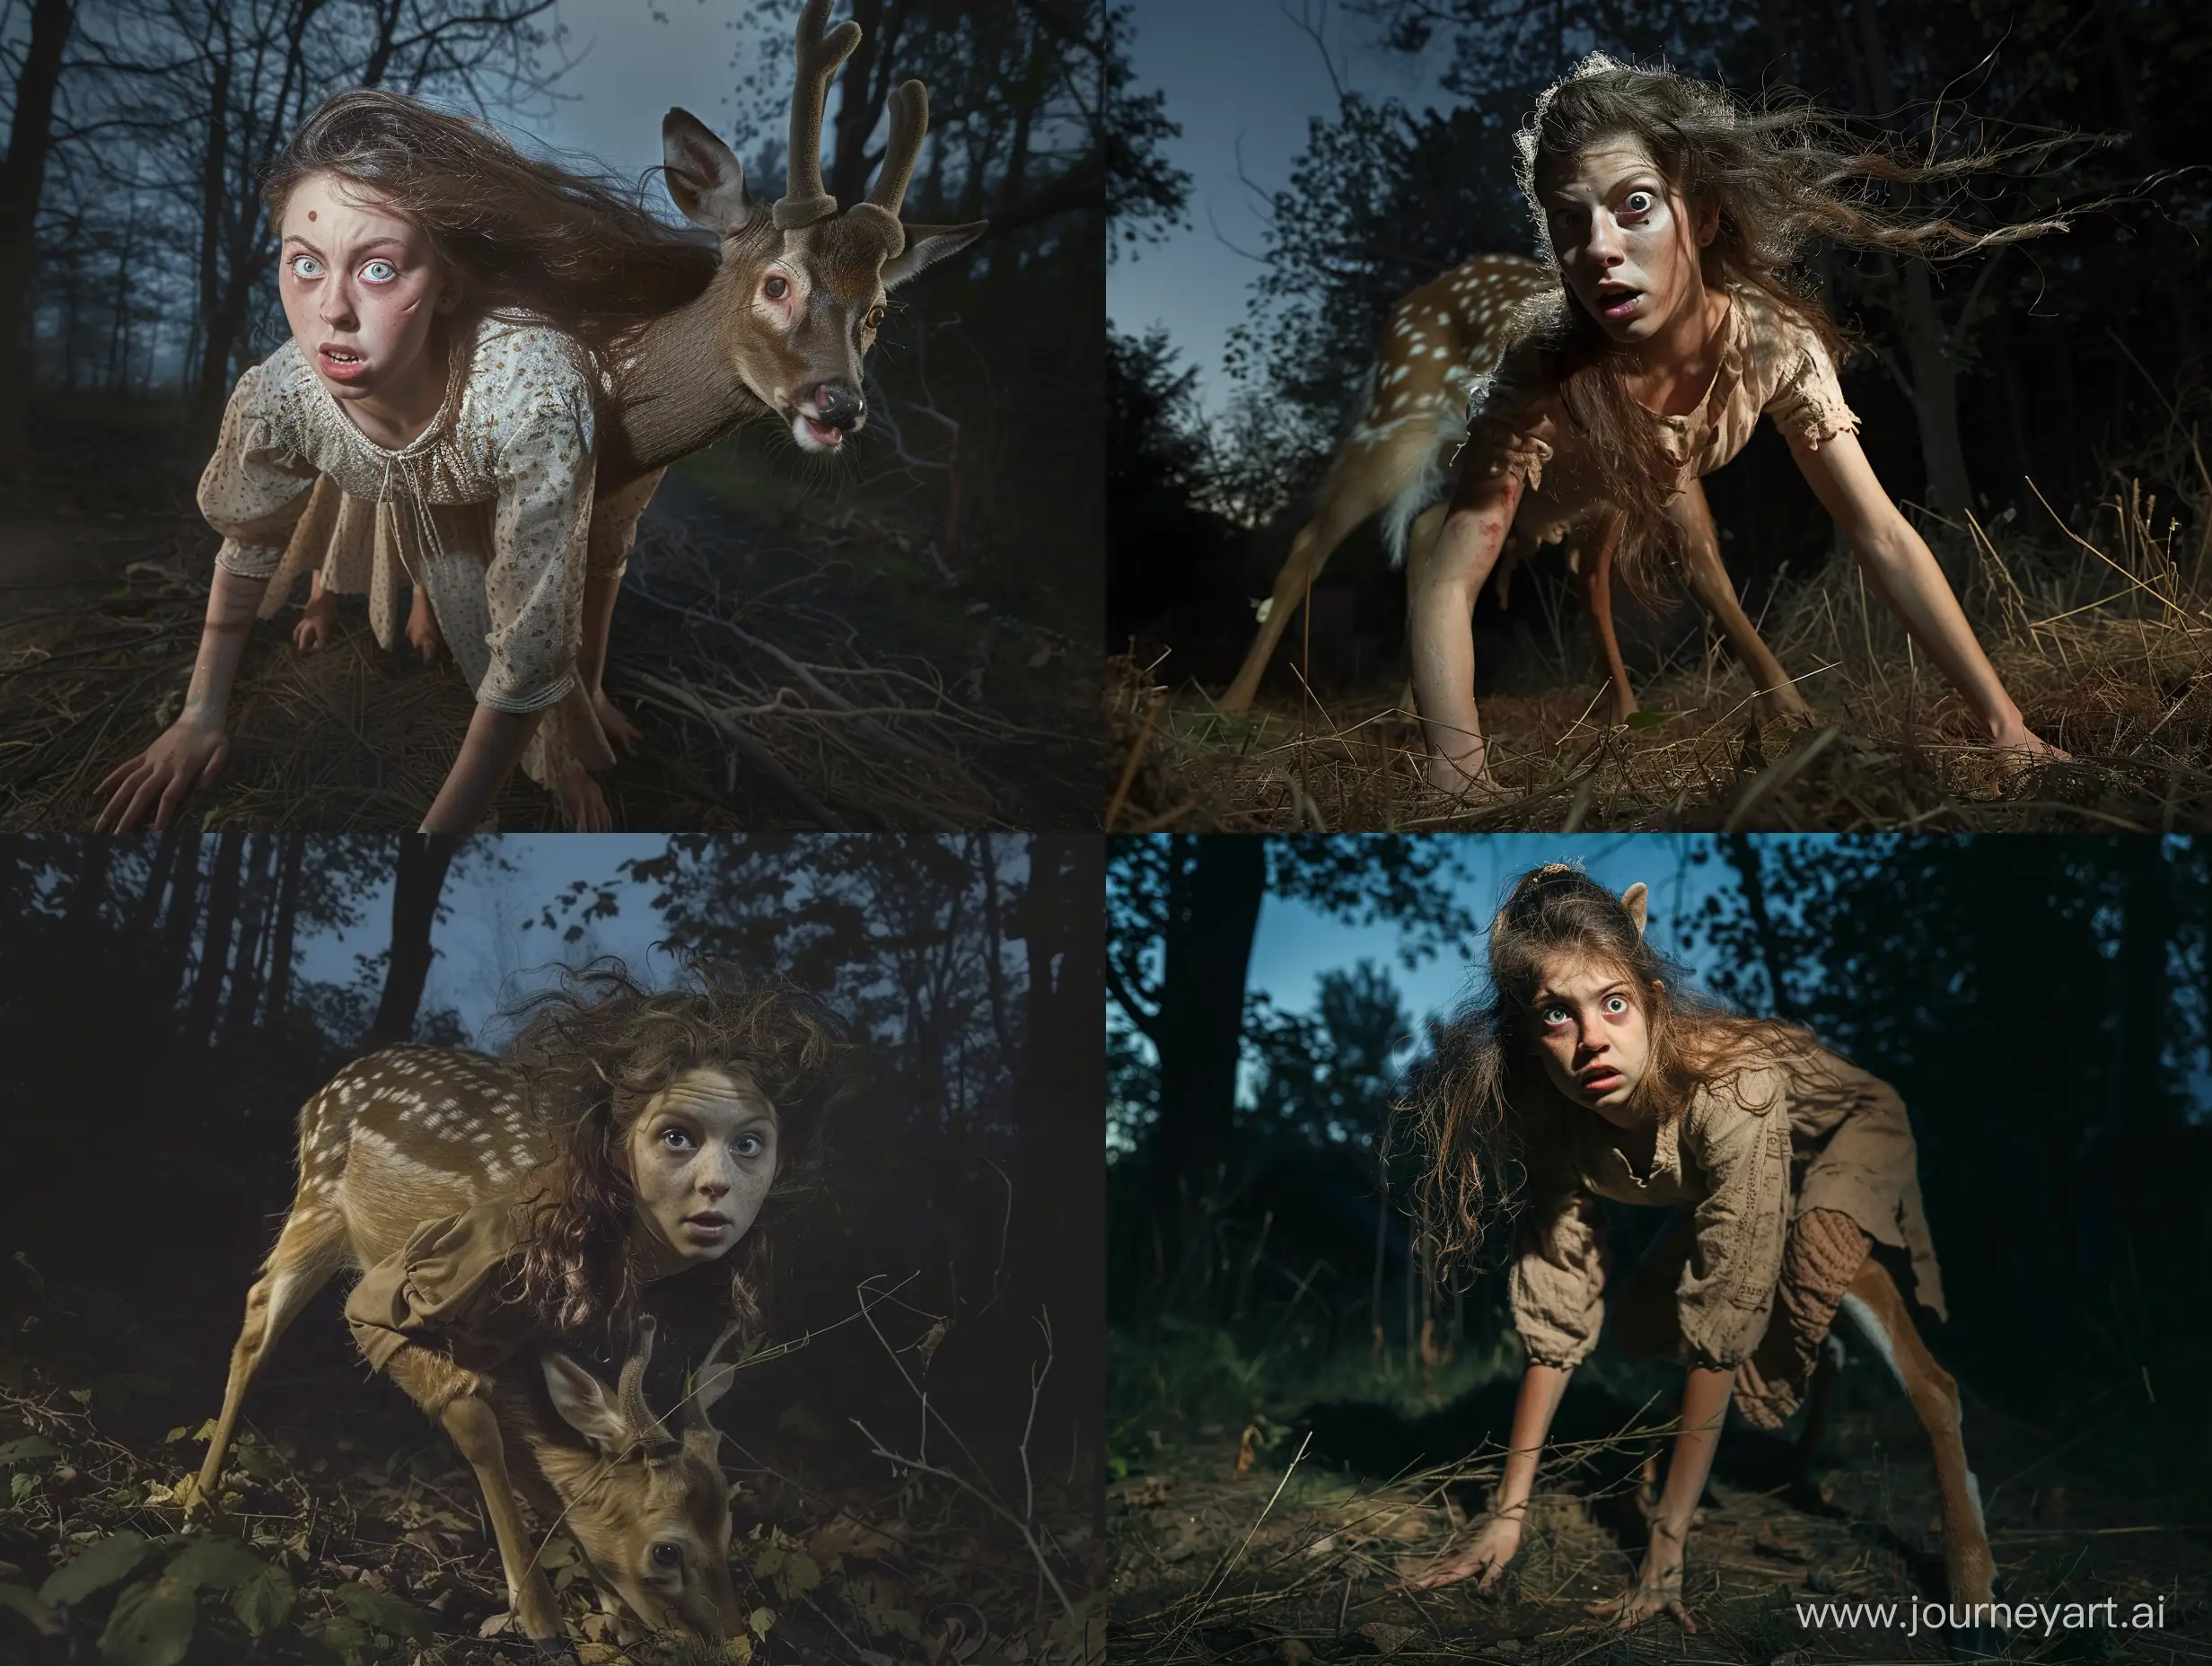 A photograph of a medieval princess with loose brown hair, who has been transformed into a deer. The photo is taken while the transformation is almost completed. She is standing on all fours in a forest at night. She has a desperate expression. Full body picture.